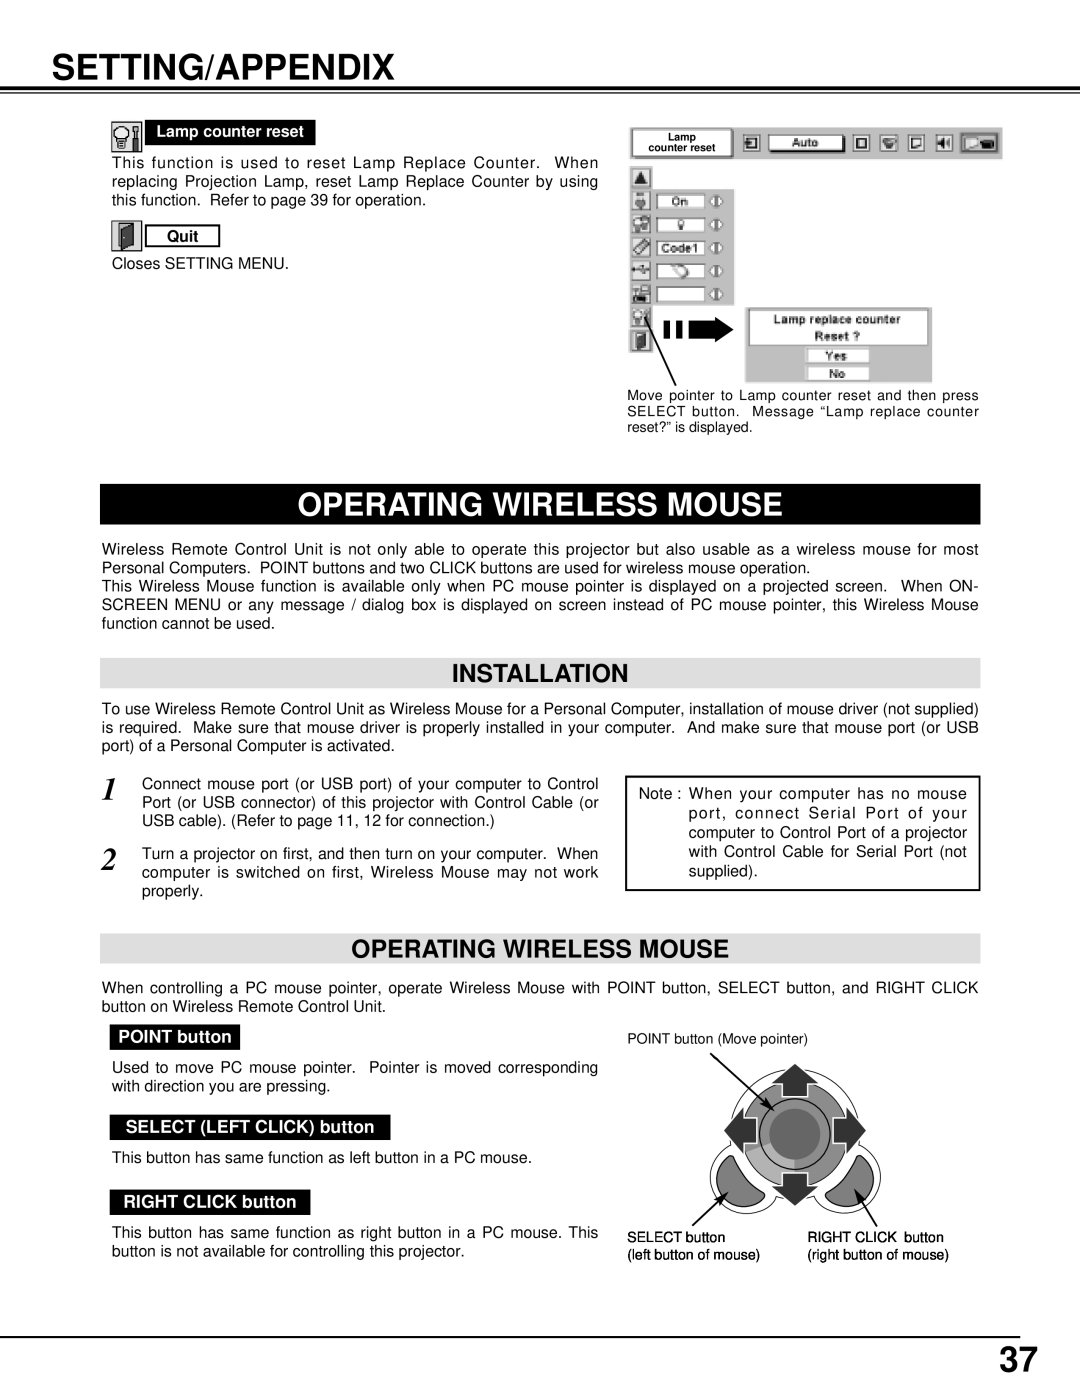 BOXLIGHT MP-42T manual Setting/Appendix, Operating Wireless Mouse, Installation, Quit 